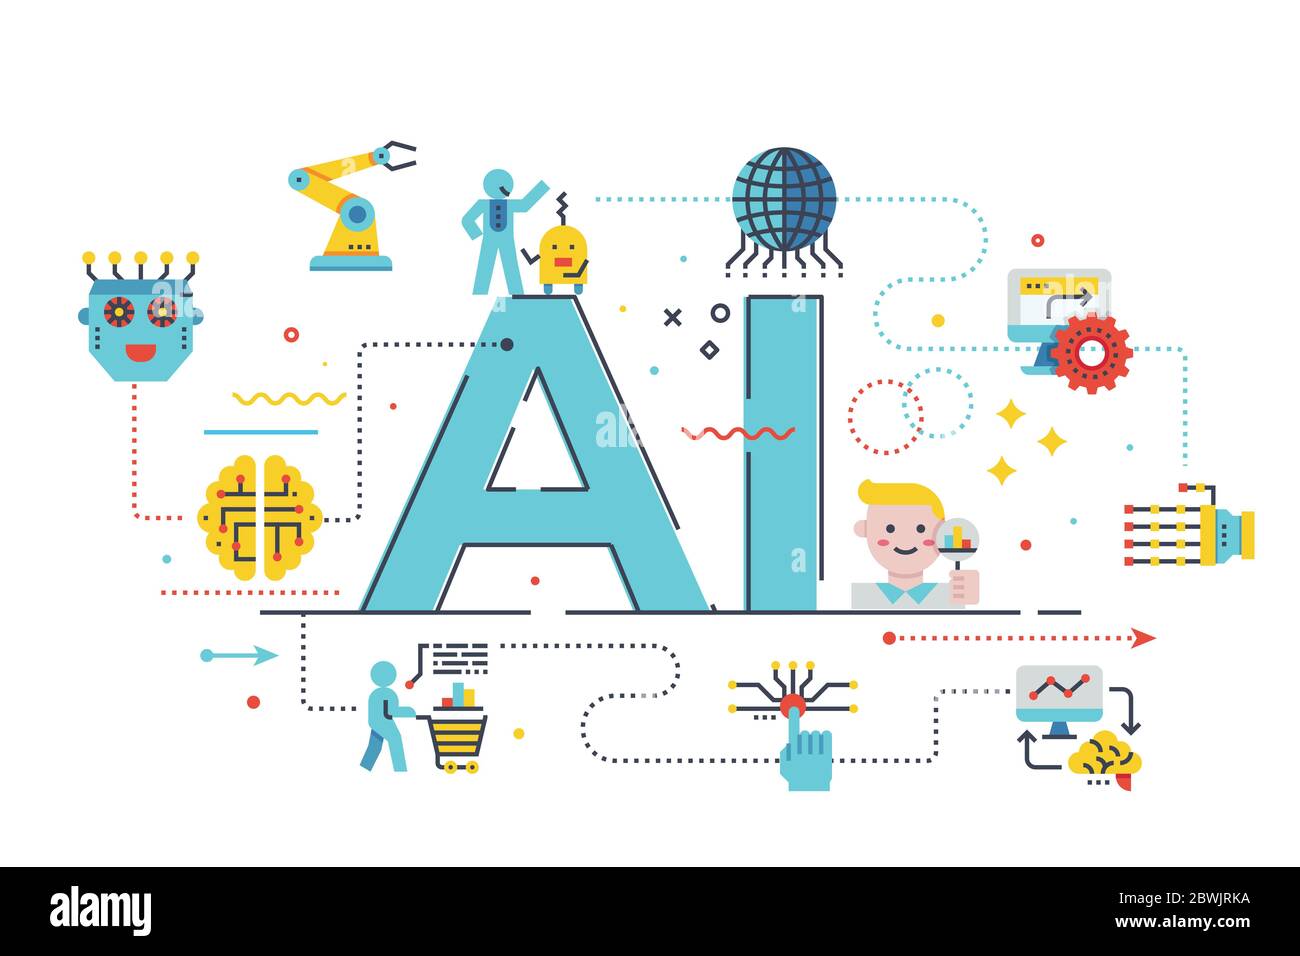 AI (artificial intelligence) word lettering illustration with icons for web banner, flyer, landing page, presentation, book cover, article, etc. Stock Vector